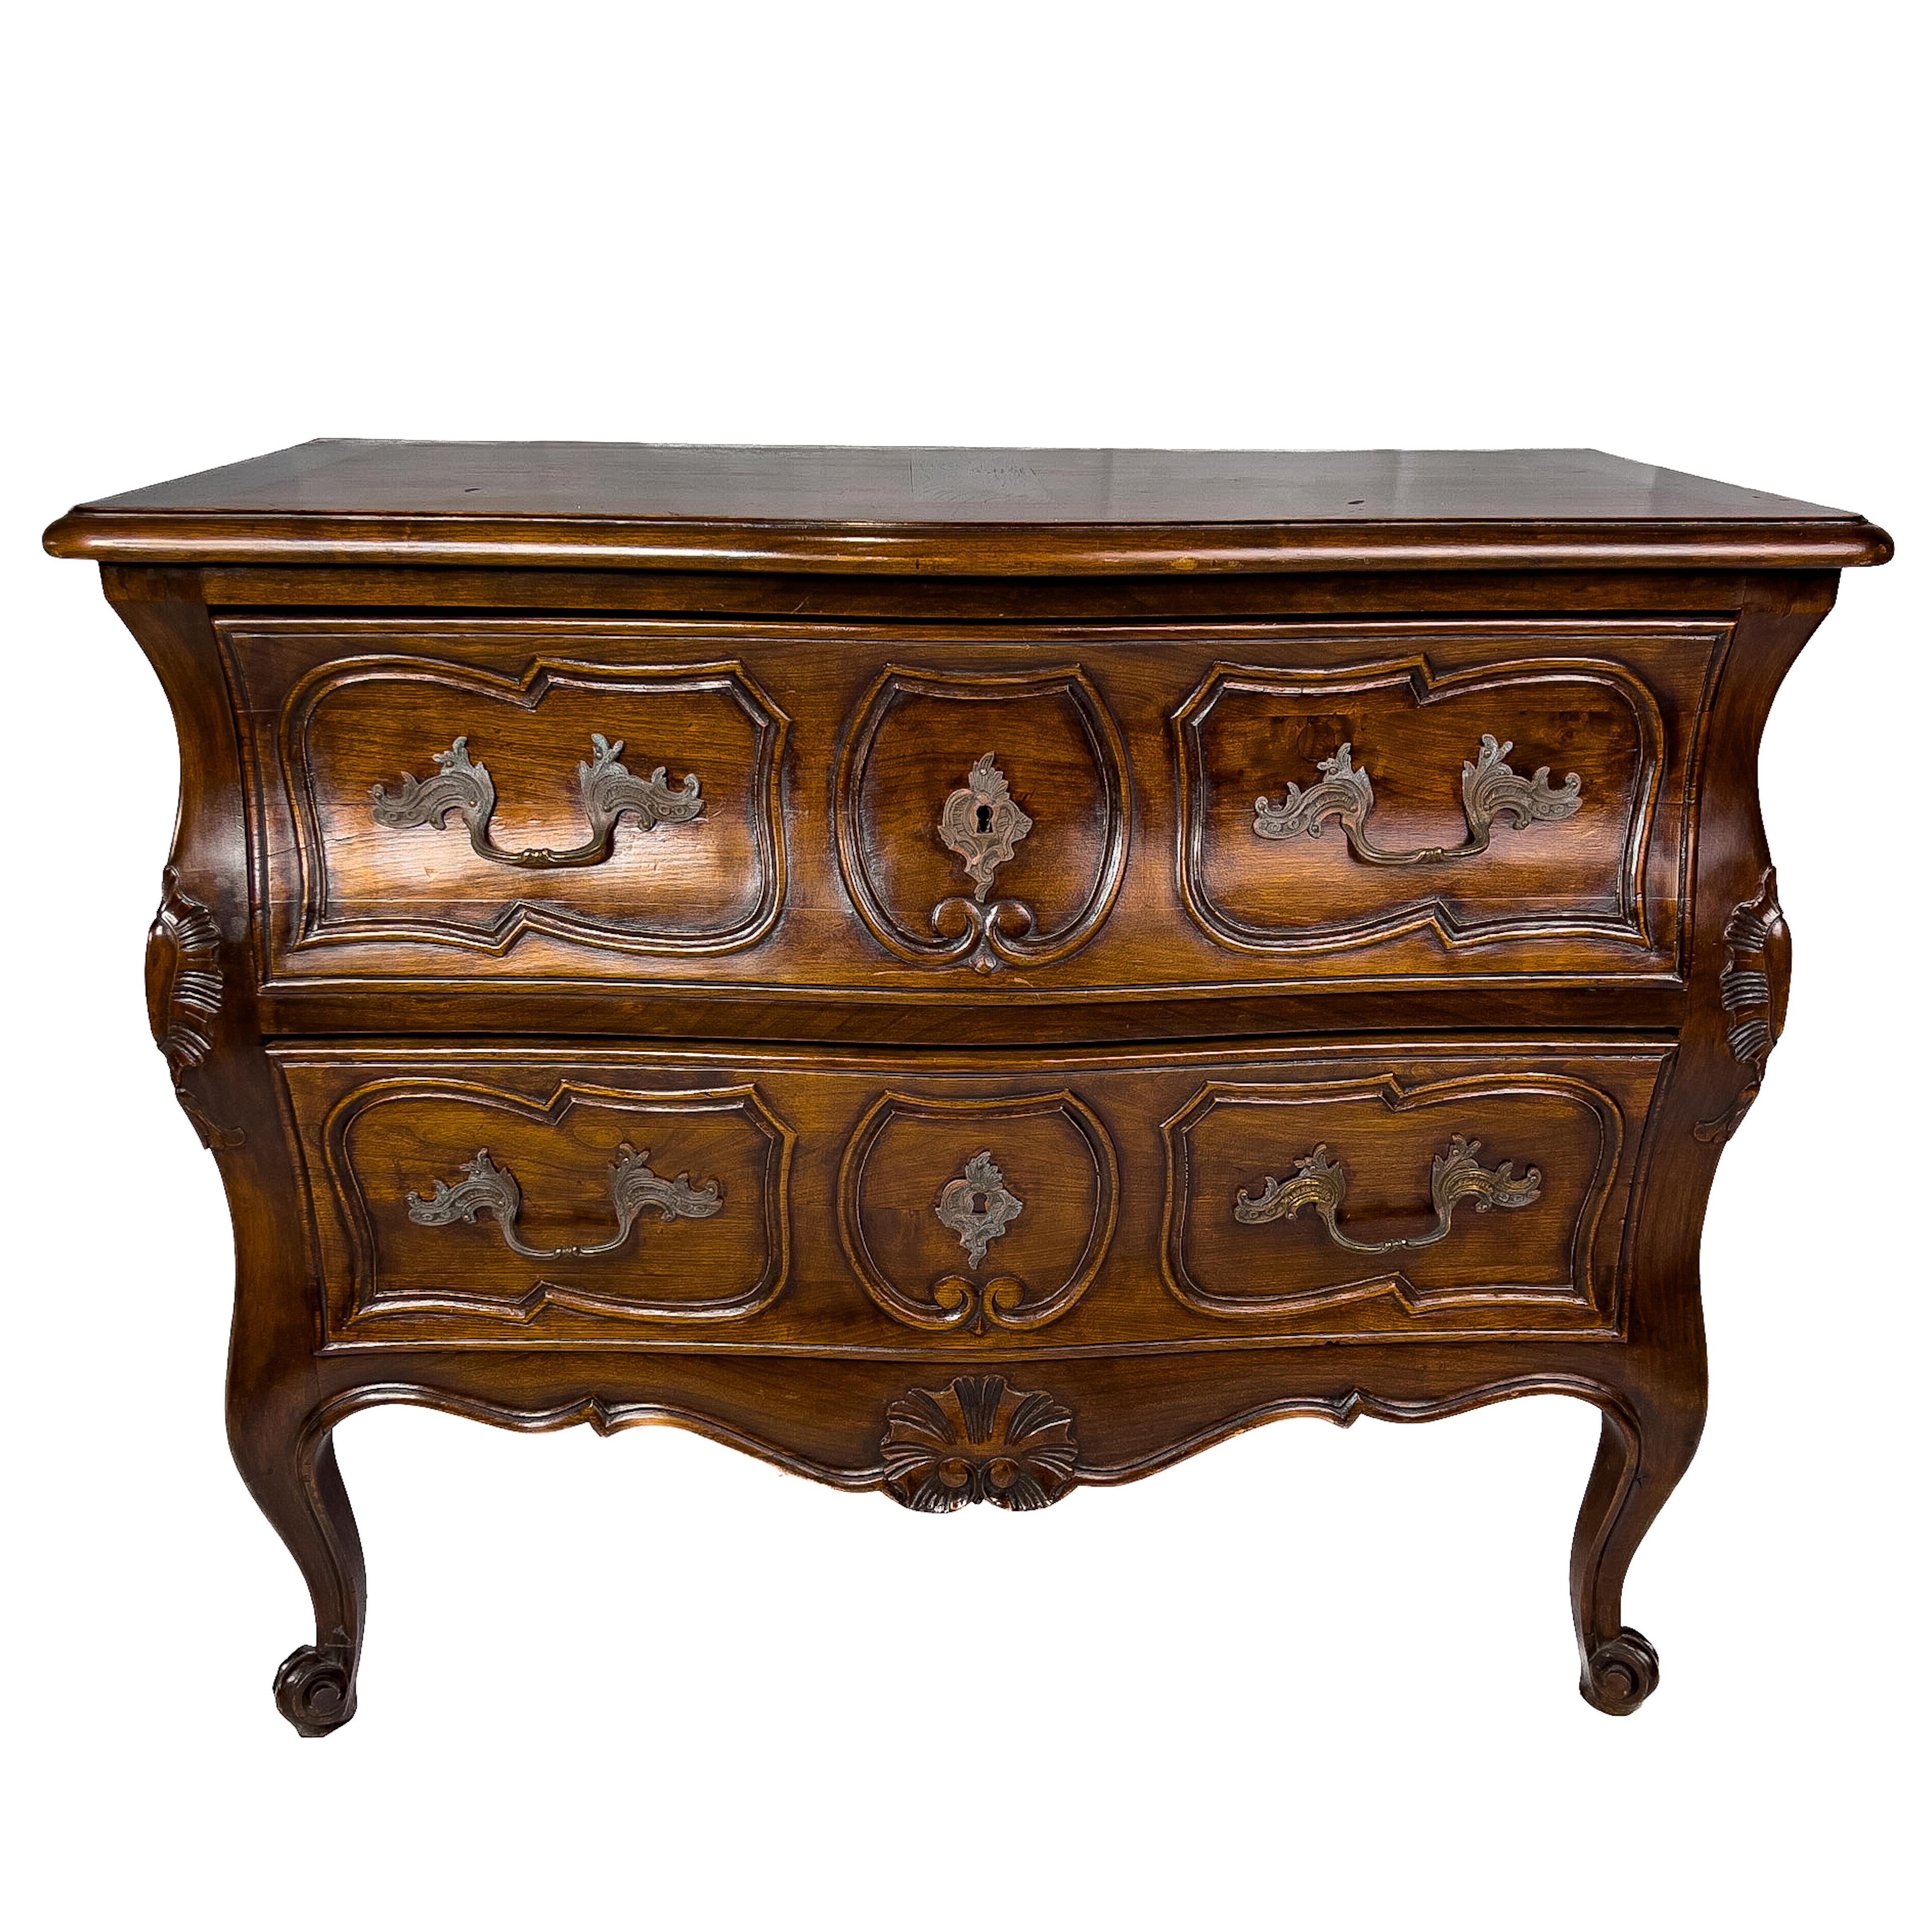 20th C. Louis XV Style French commode with a serpentine front, carved detail and cabriole legs.